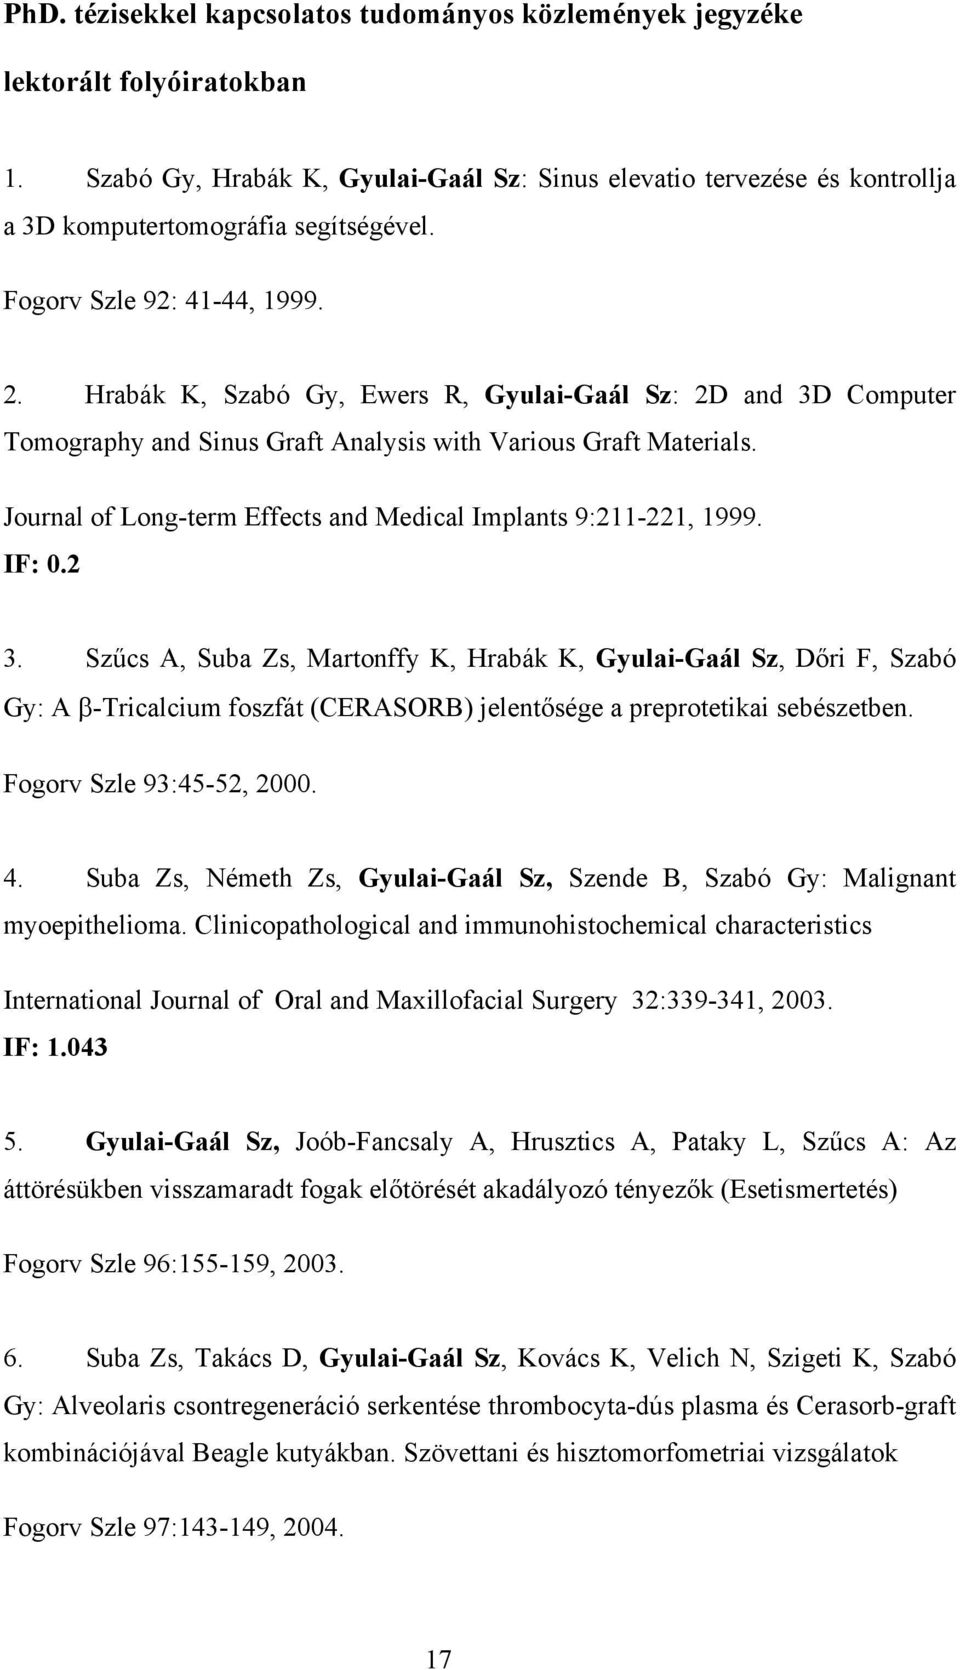 Journal of Long-term Effects and Medical Implants 9:211-221, 1999. IF: 0.2 3.